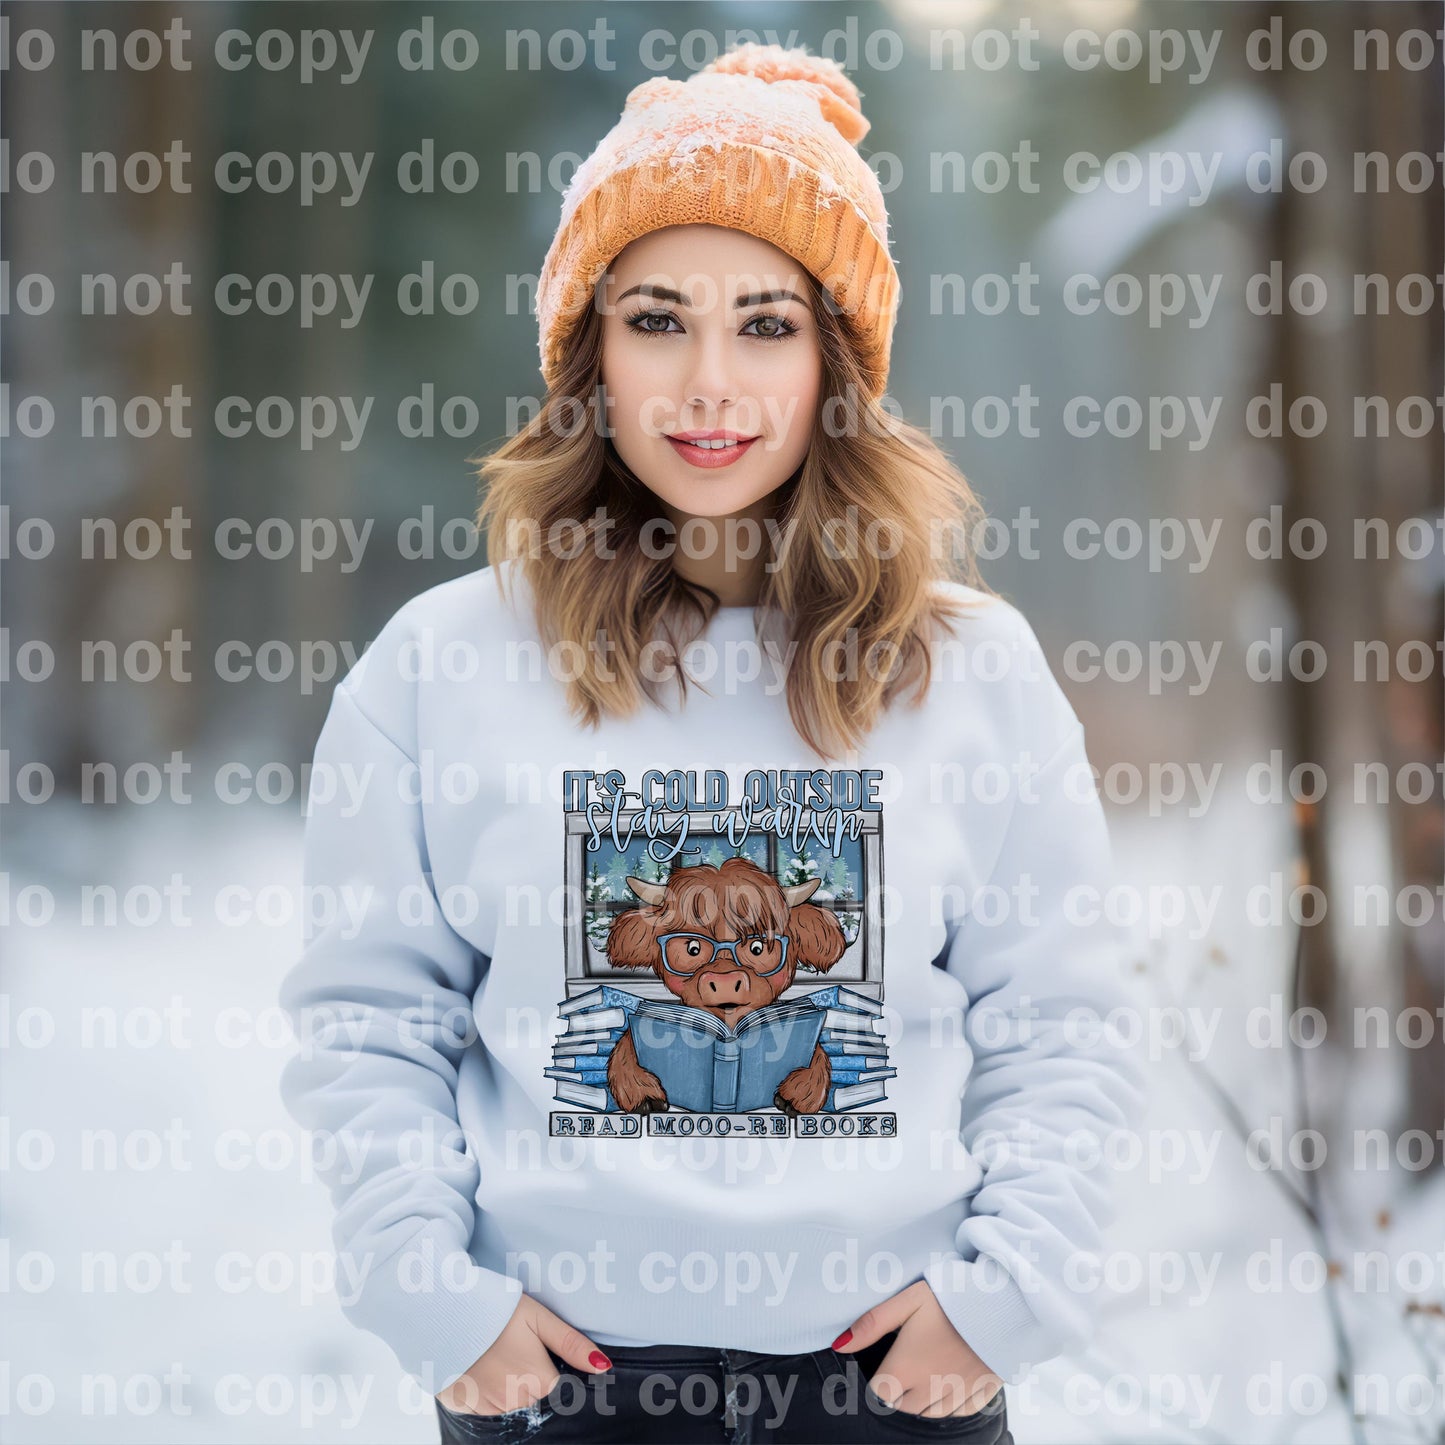 Its Cold Outside Stay Warm Read Mooore Books Dream Print or Sublimation Print